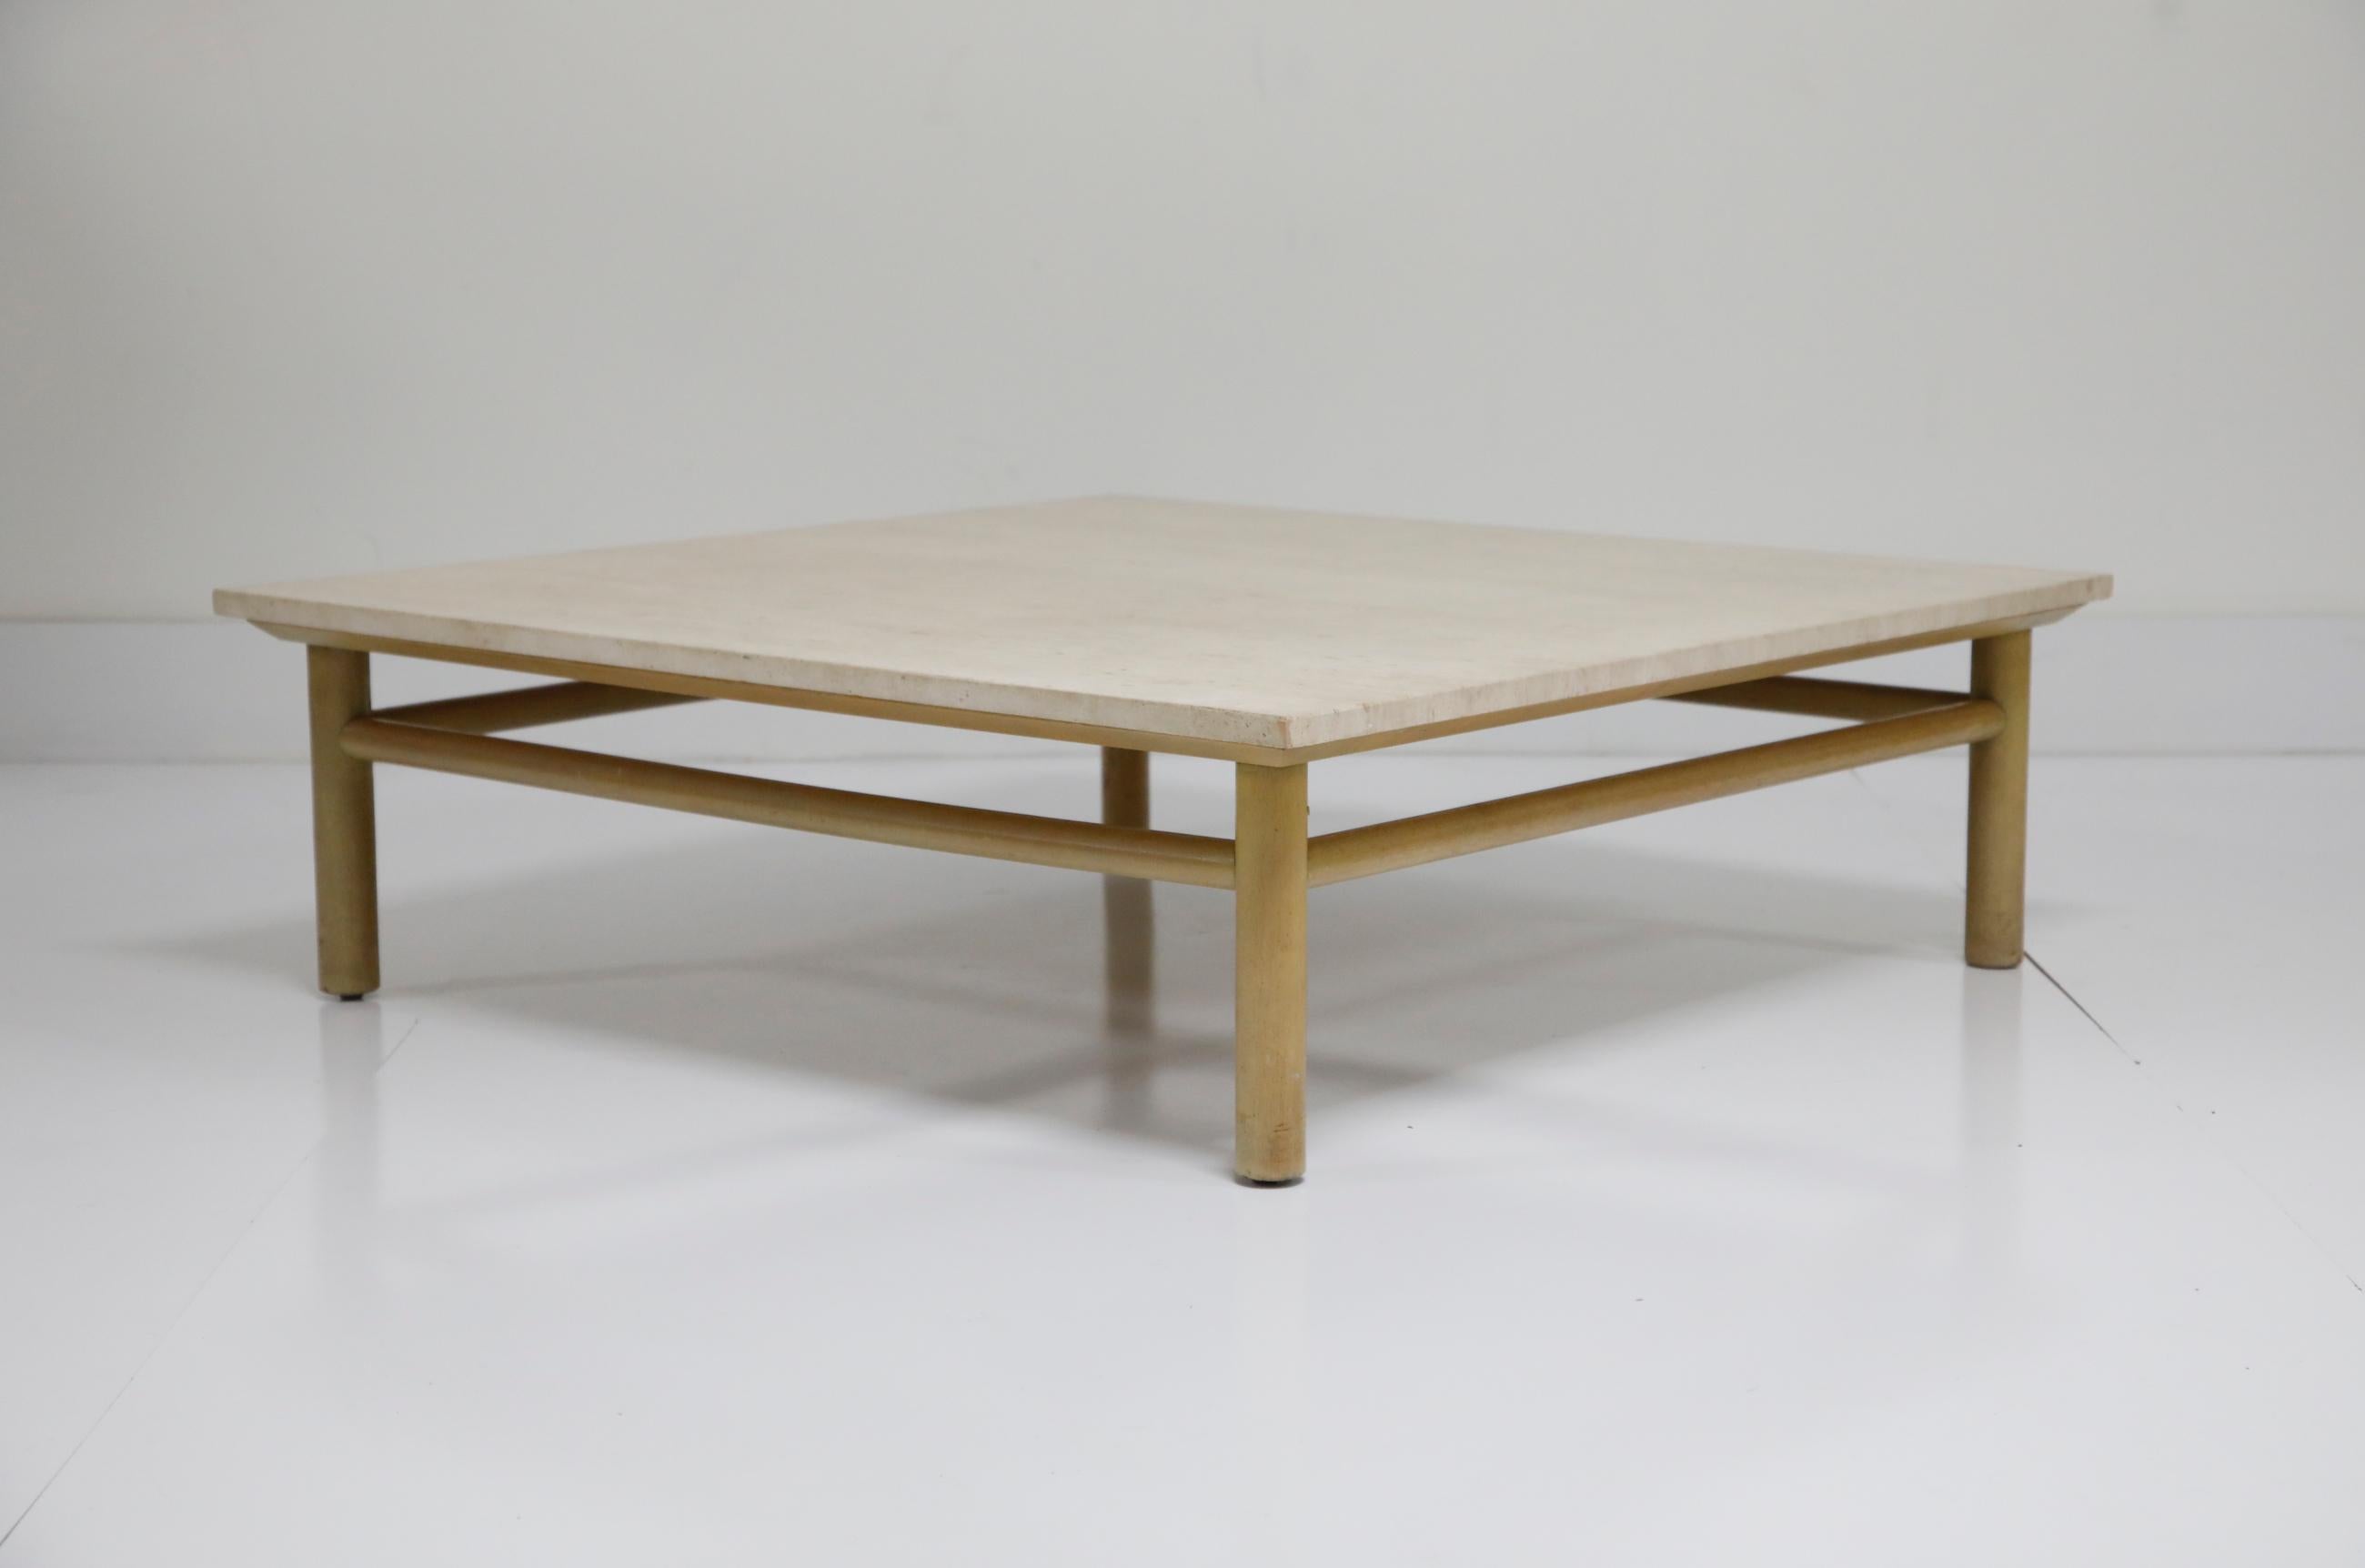 A beautiful, and large, travertine coffee table by T.H. Robsjohn Gibbings for Widdicomb of Grand Rapids. This incredible table is signed on the table base with a Widdicomb placard, and has its original travertine top which is in very good condition.